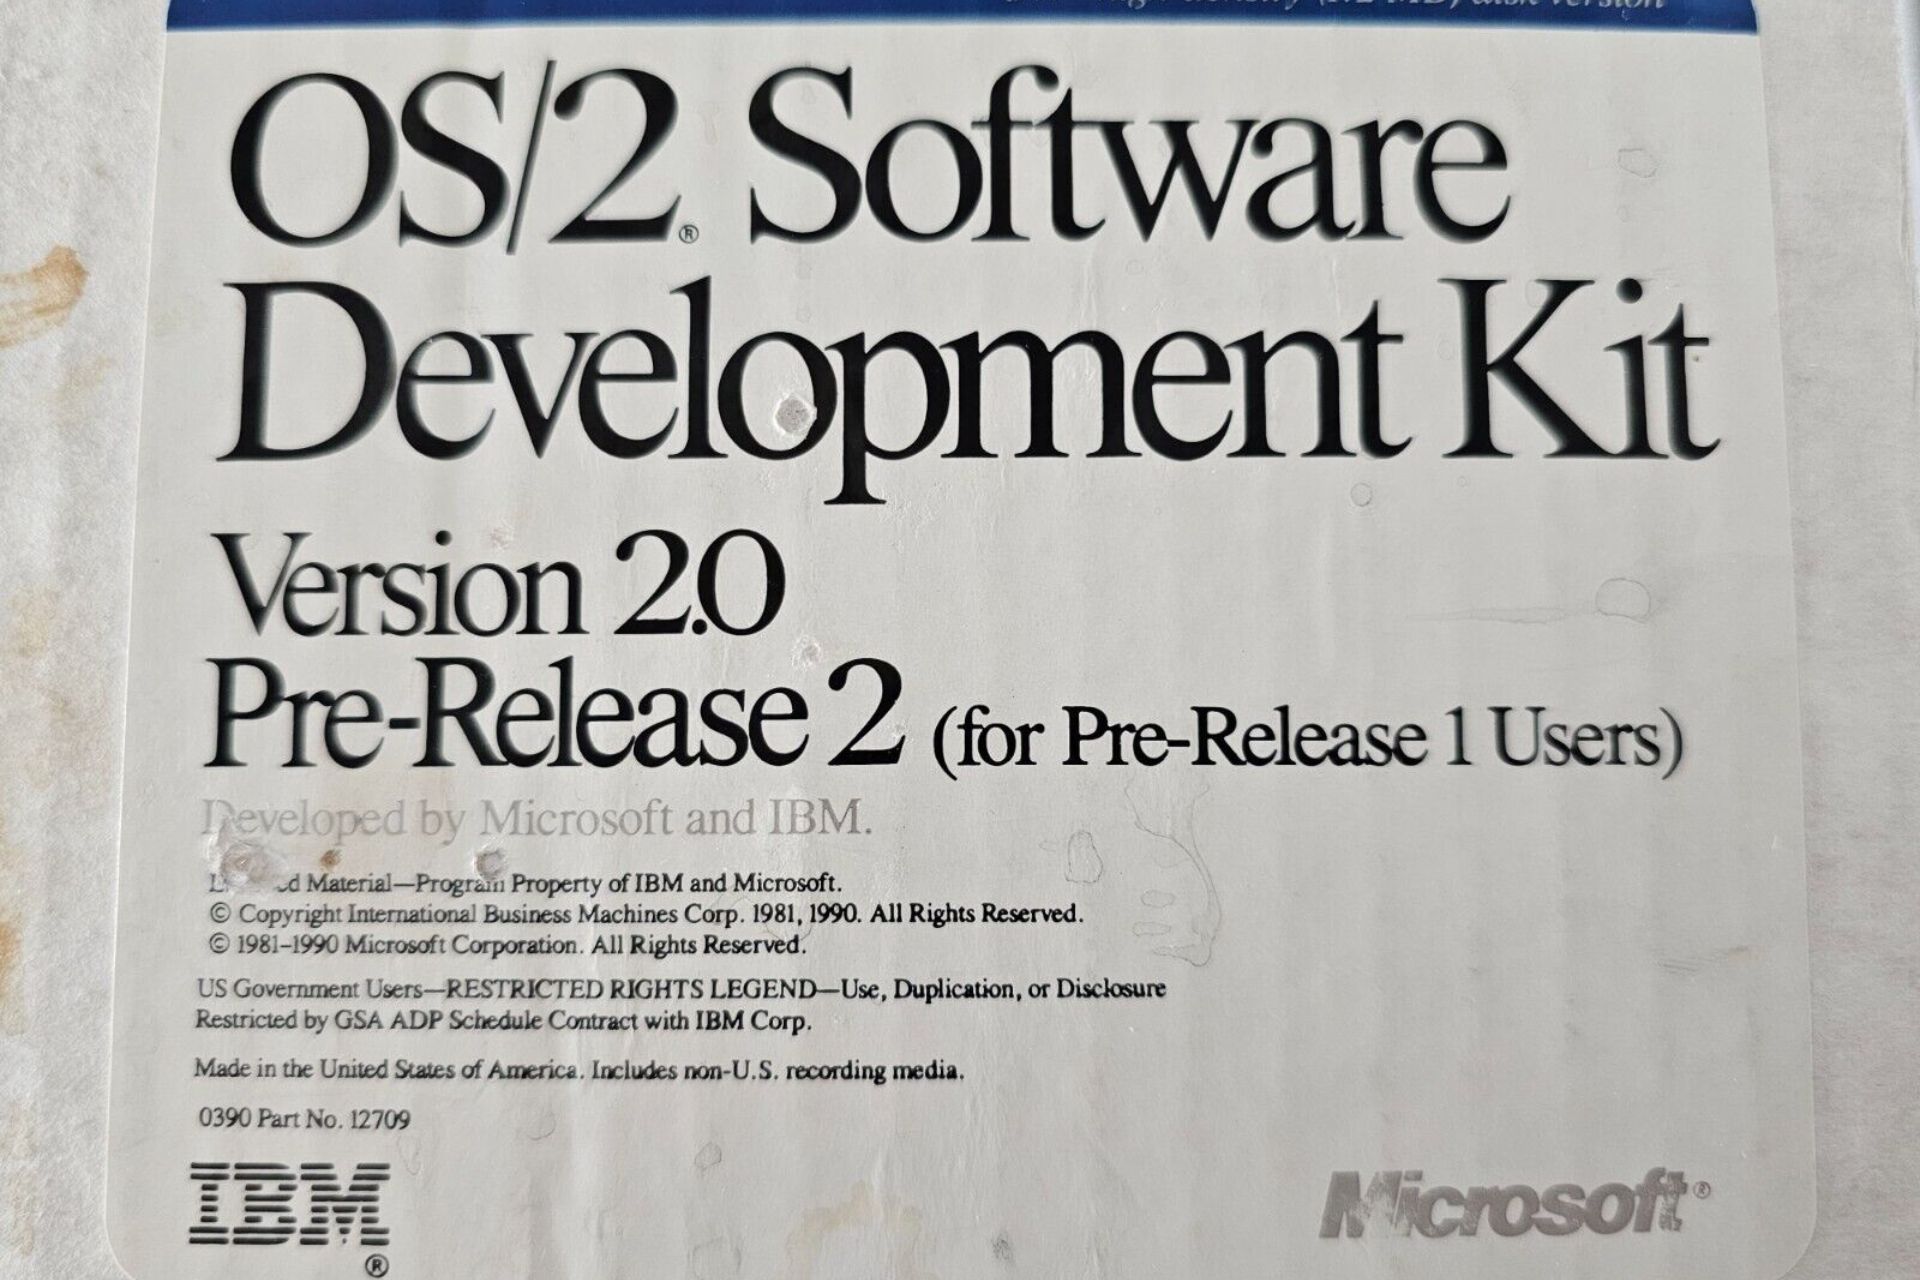 The 34-year-old original preview edition of Microsoft OS/2 2.0 was sold at just $650, but you can still get it